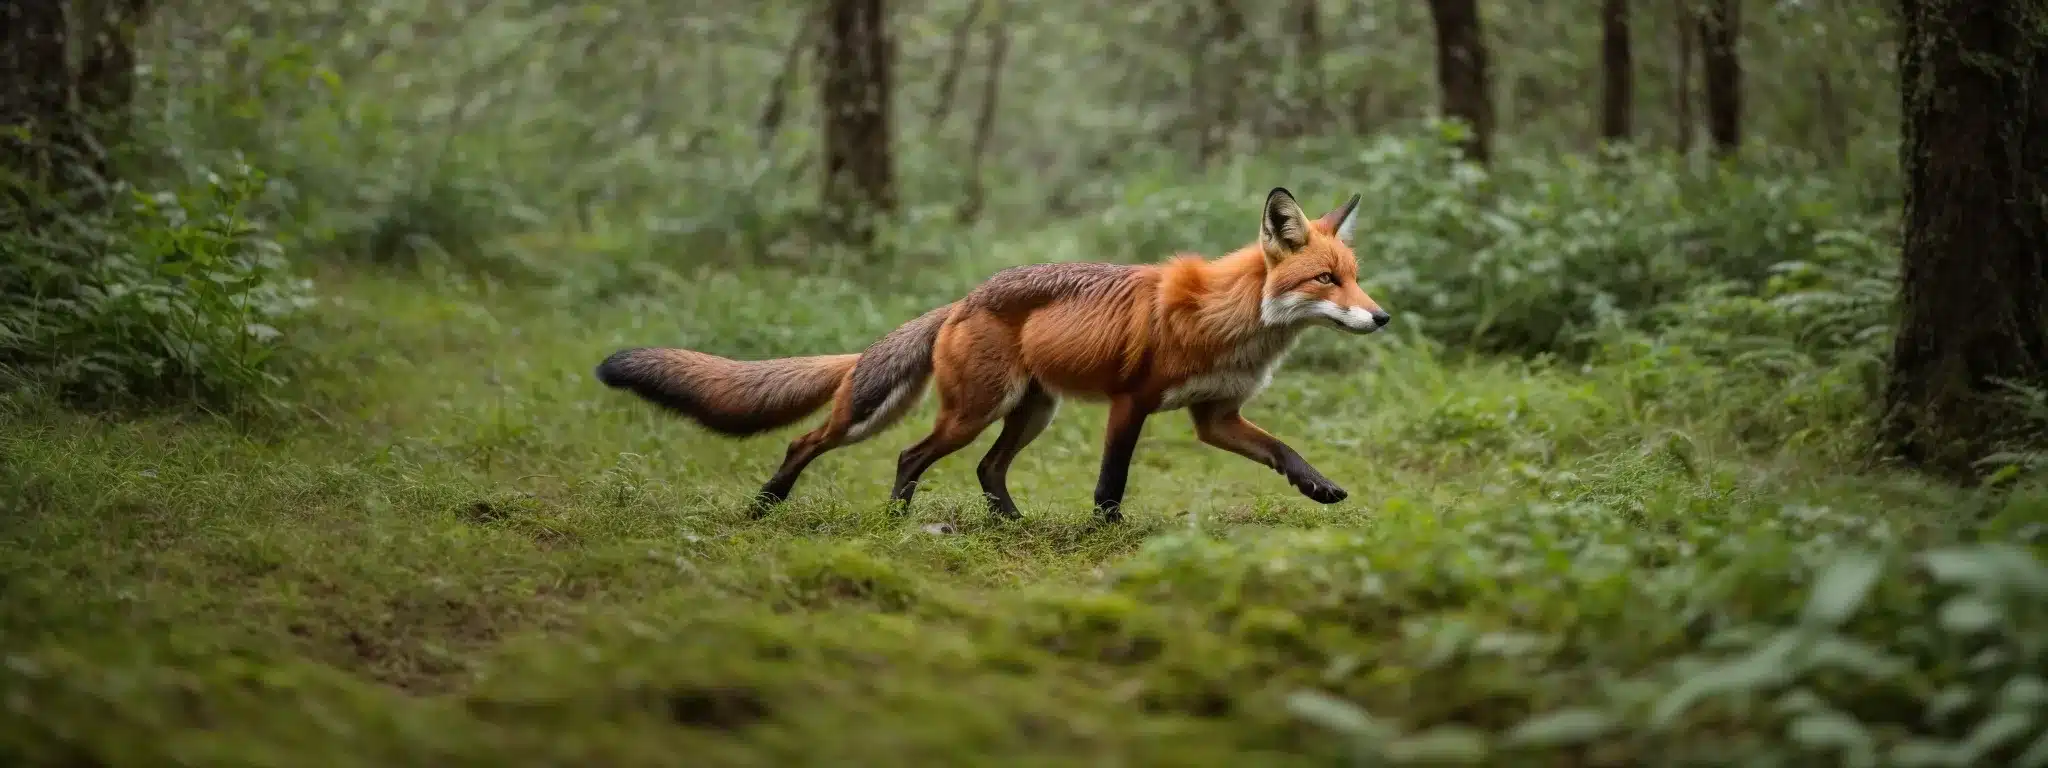 A Fox Swiftly Navigates A Lush Forest Teeming With Diverse Wildlife.